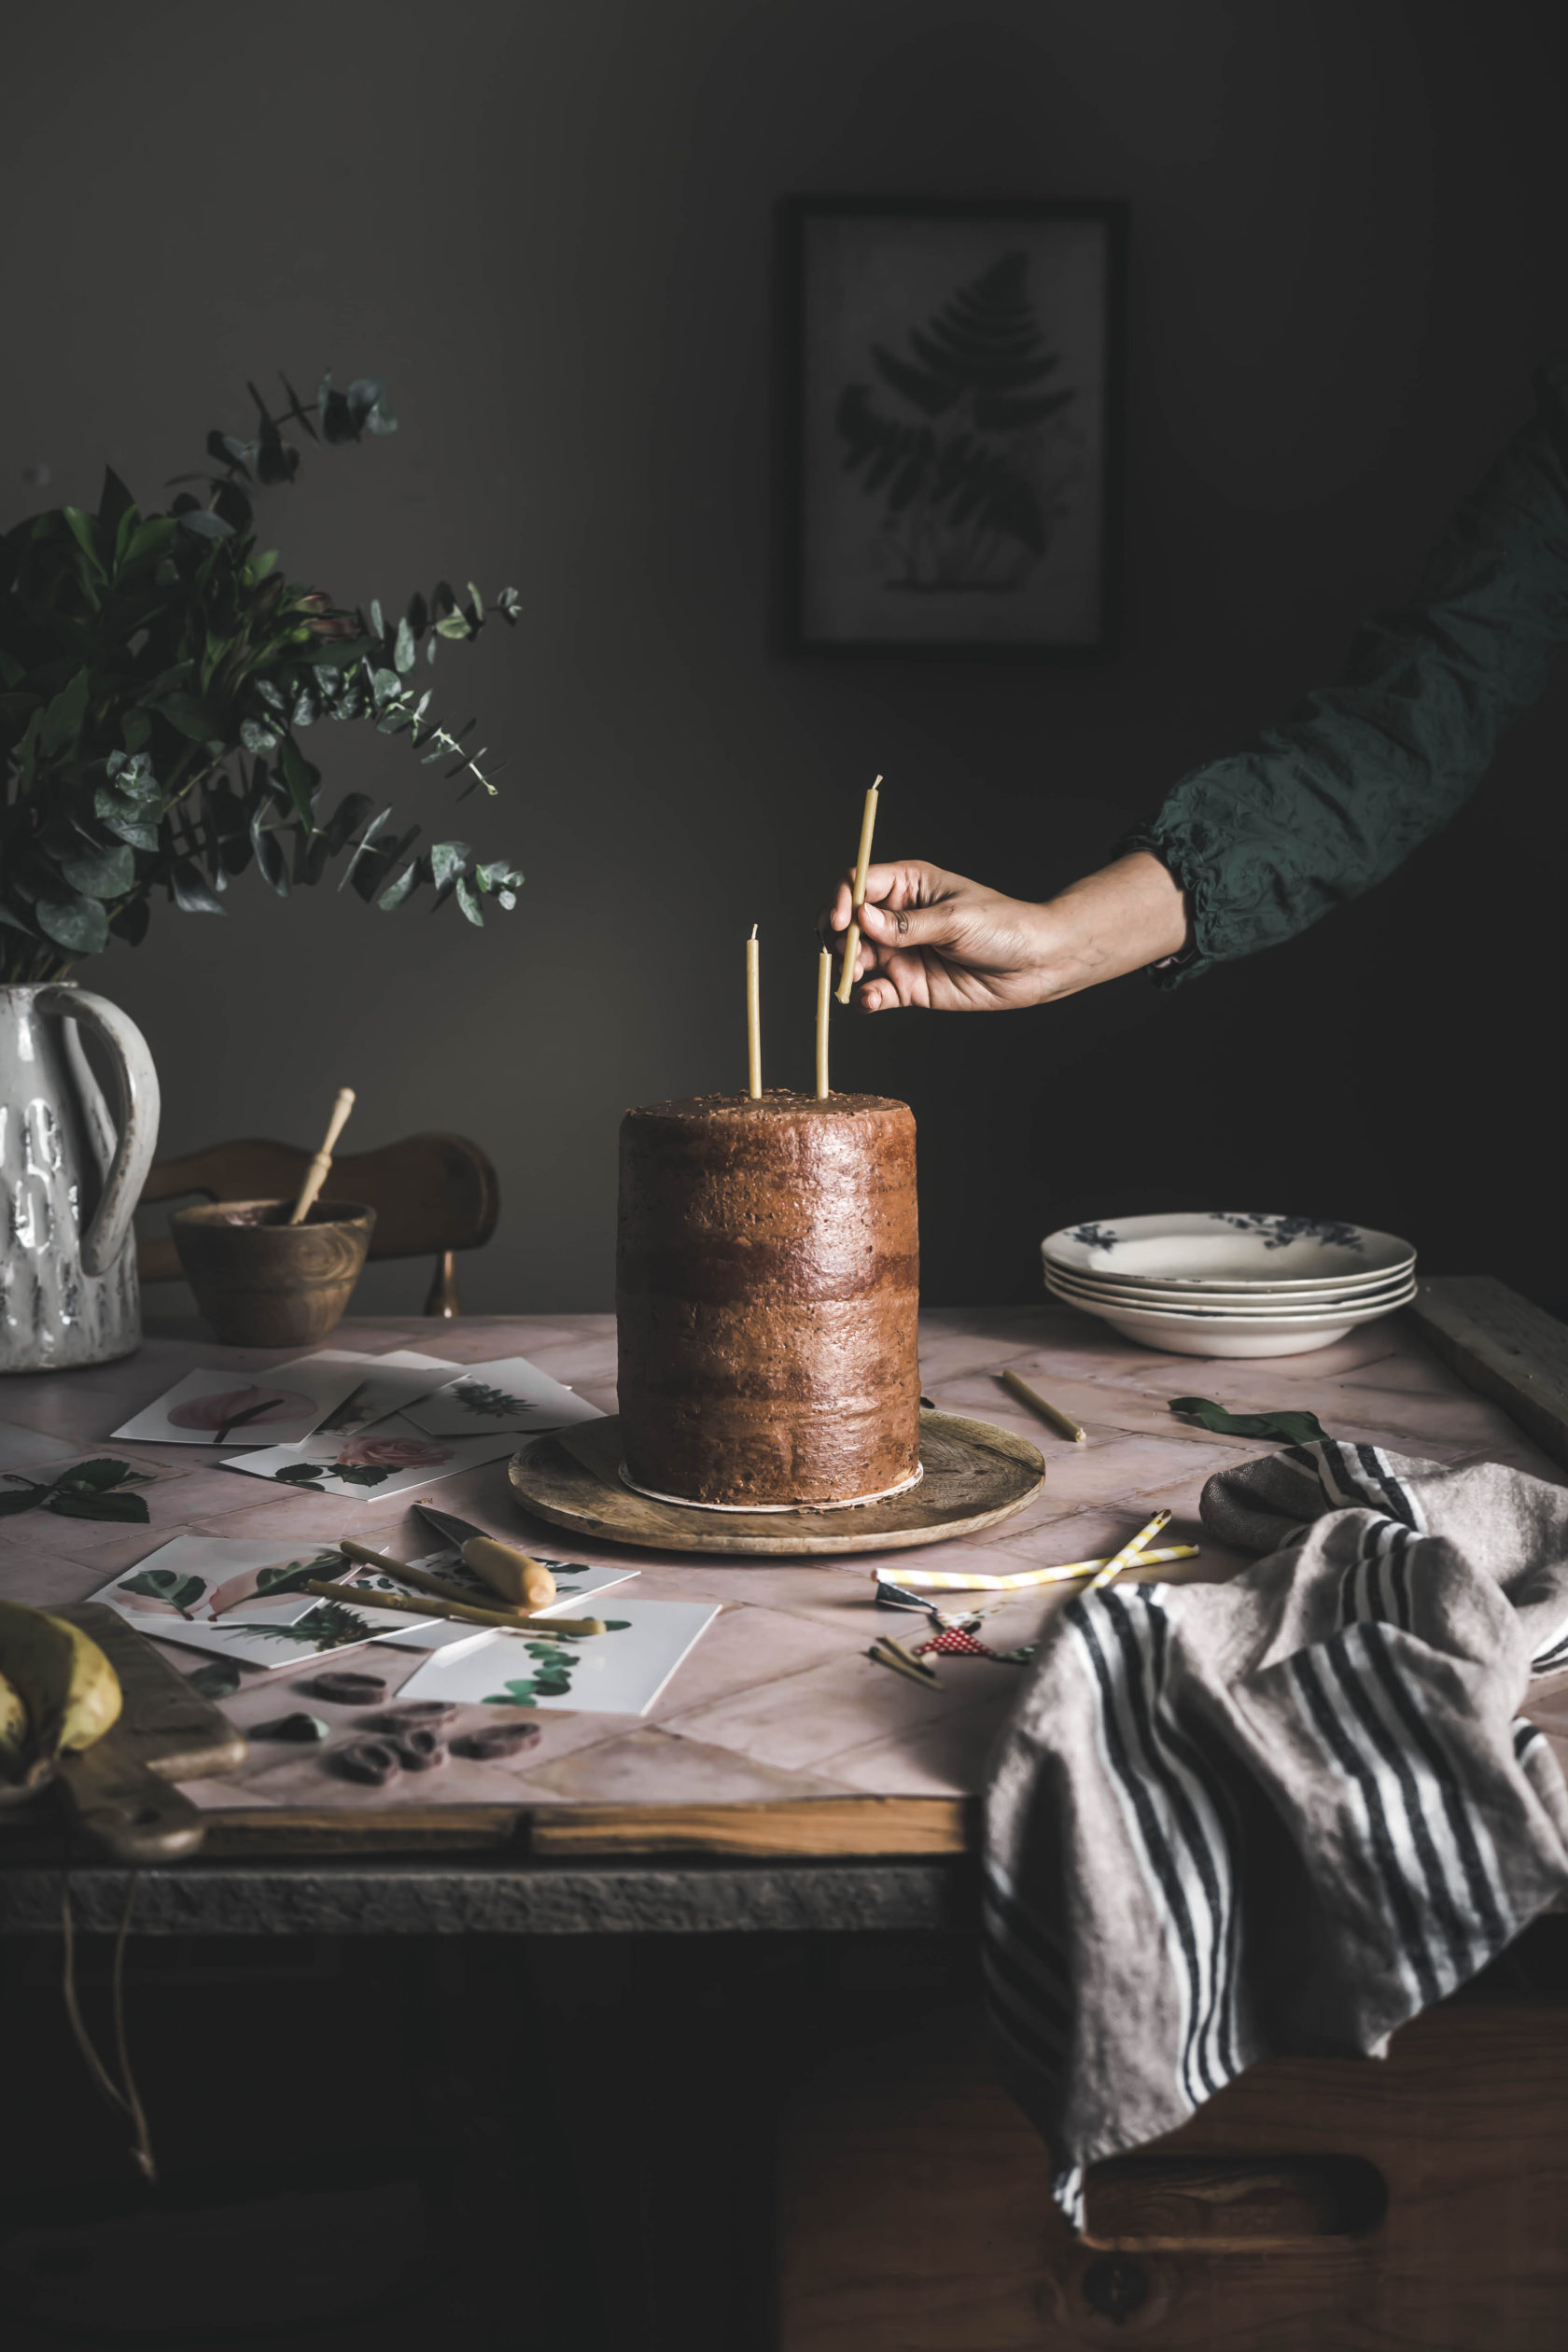 BROWNED BUTTER BANANA CAKE WITH CHOCOLATE SWISS MERINGUE BUTTERCREAM